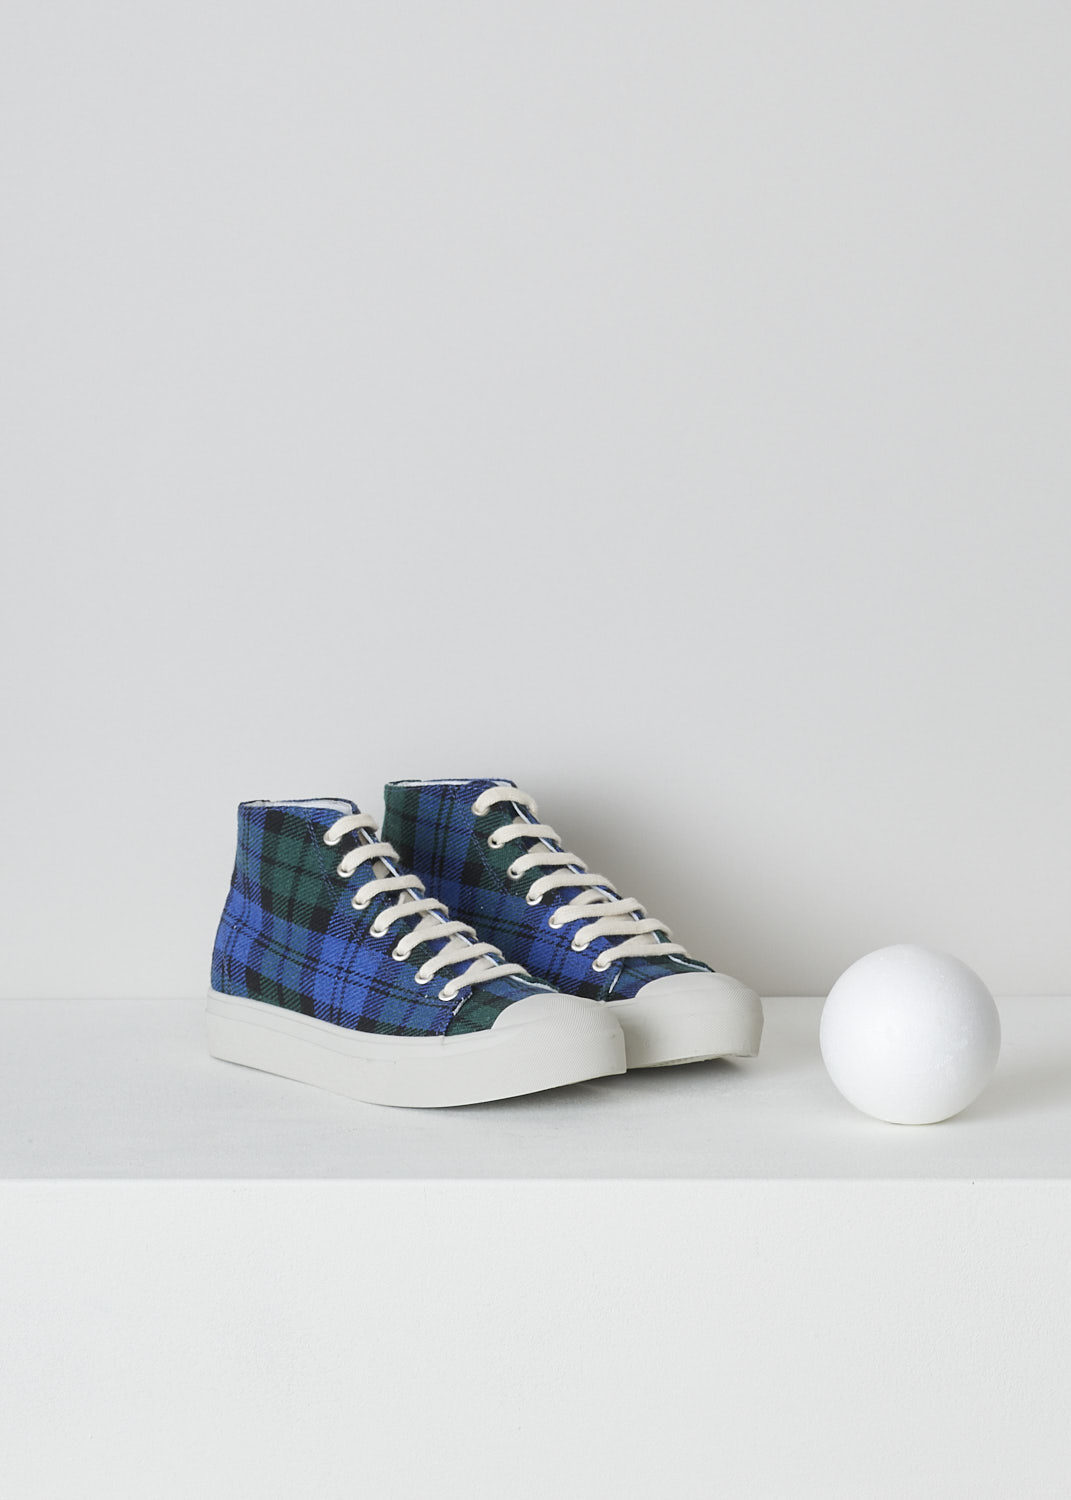 SOFIE Dâ€™HOORE, BLUE AND GREEN TARTAN SNEAKERS, FOSTER_WSCOT_TARTAN_5, Green, Blue, Print, Front, These high top sneakers with blue and green tartan print feature front lace-up fastening with white laces. These sneakers have a round toe with a white rubber toe cap. These shoes have white rubber soles.
  
